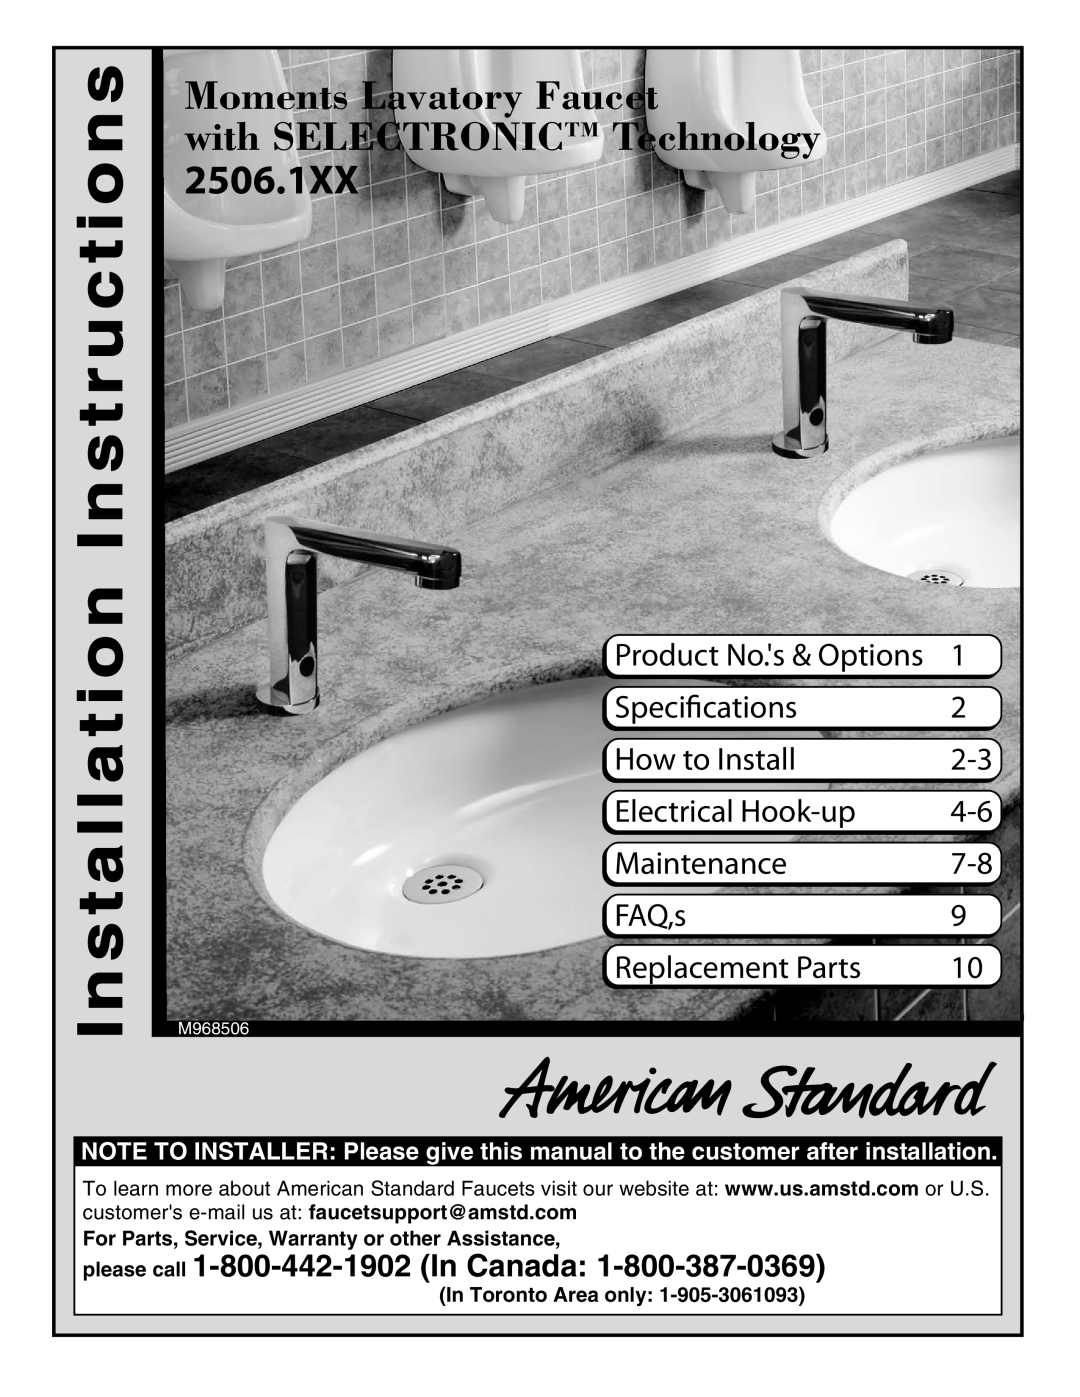 American Standard 256.1XX warranty Moments Lavatory Faucet, with SELECTRONIC Technology, Speciﬁcations, How to Install 